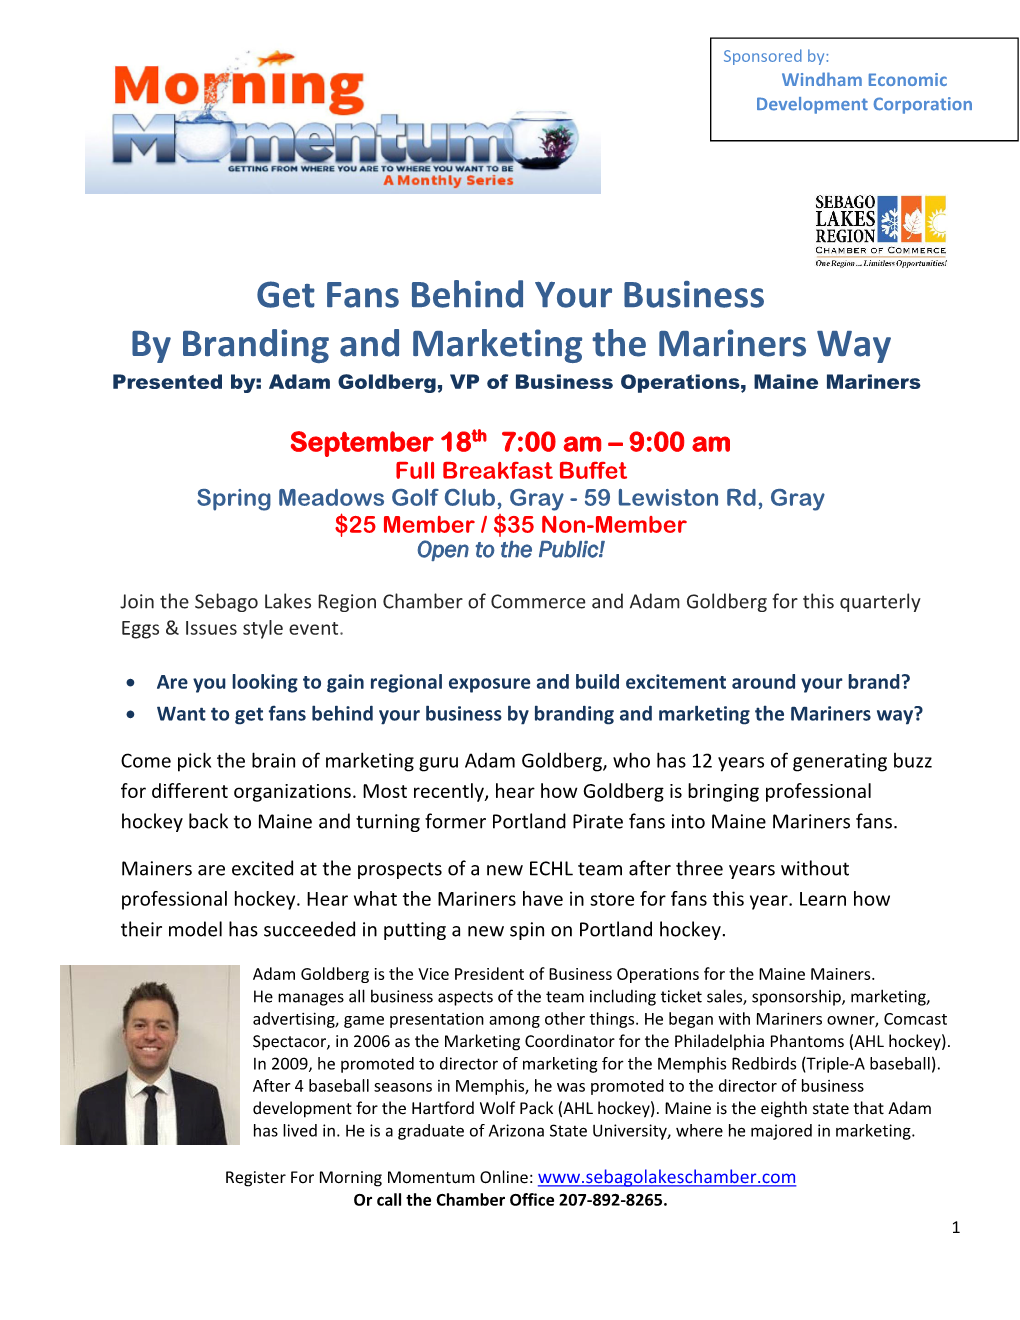 Get Fans Behind Your Business by Branding and Marketing the Mariners Way Presented By: Adam Goldberg, VP of Business Operations, Maine Mariners